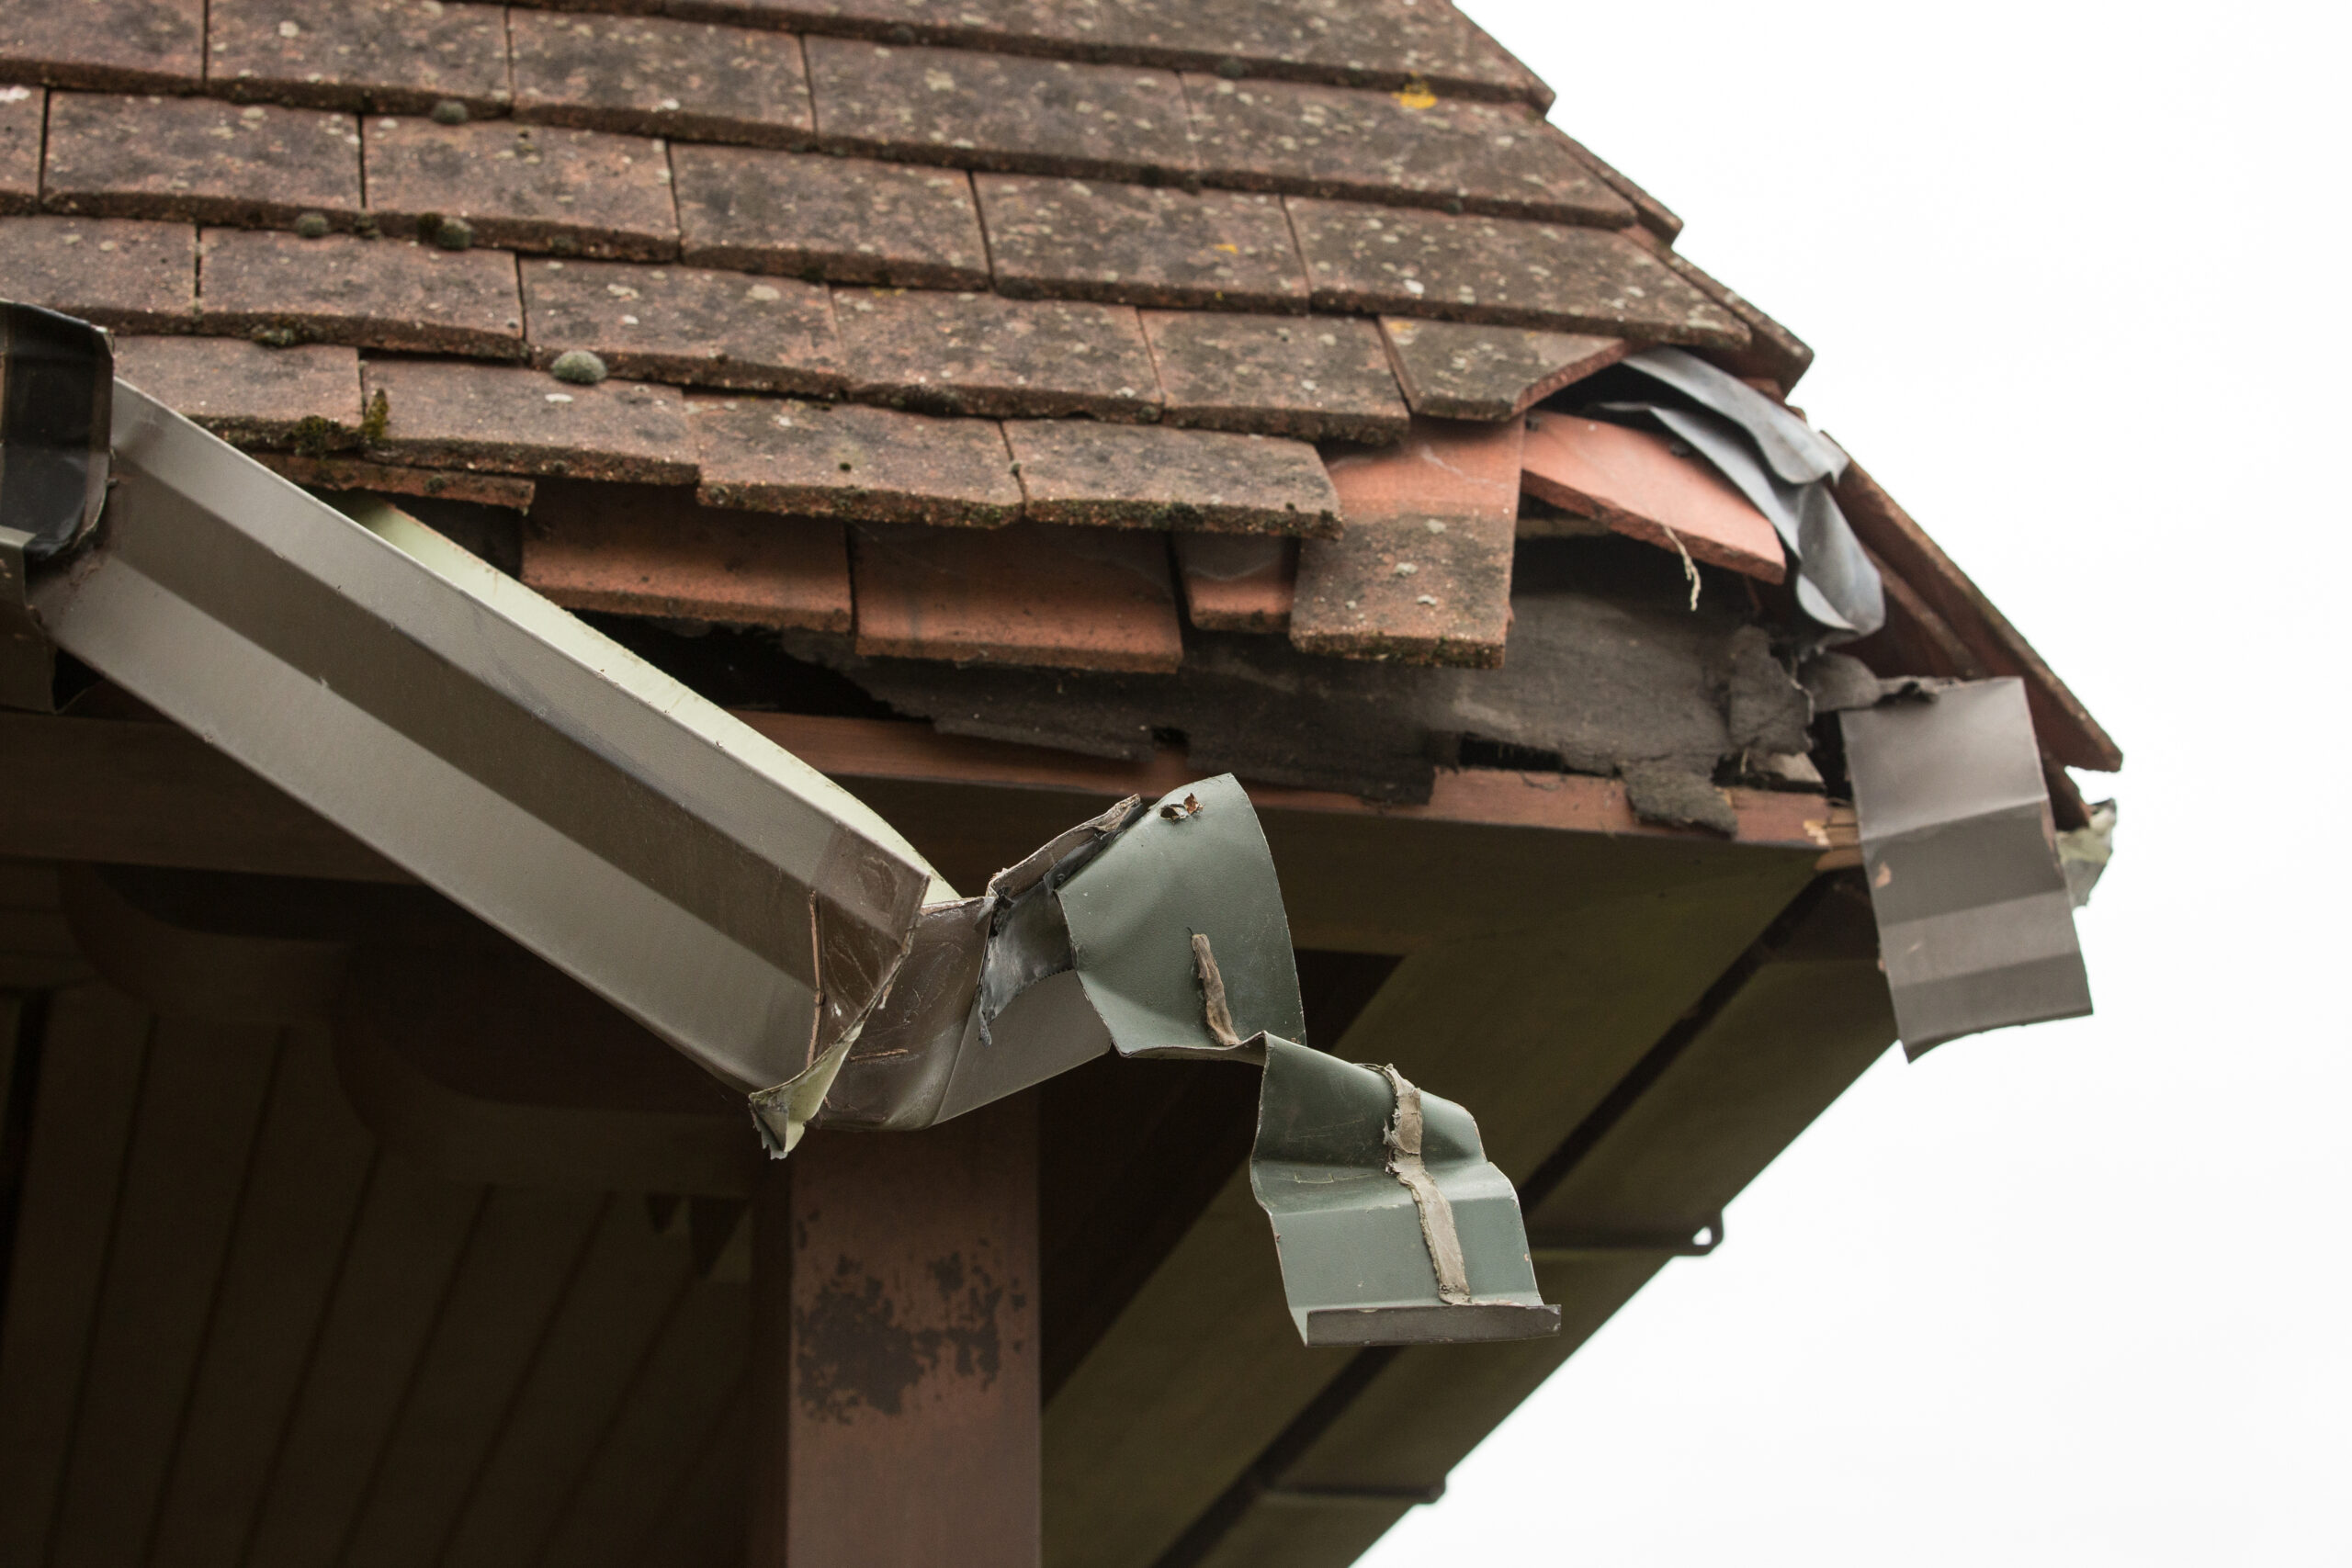 – Emergency Roof Repair: Quick Solutions for Sudden Leaks and Damage